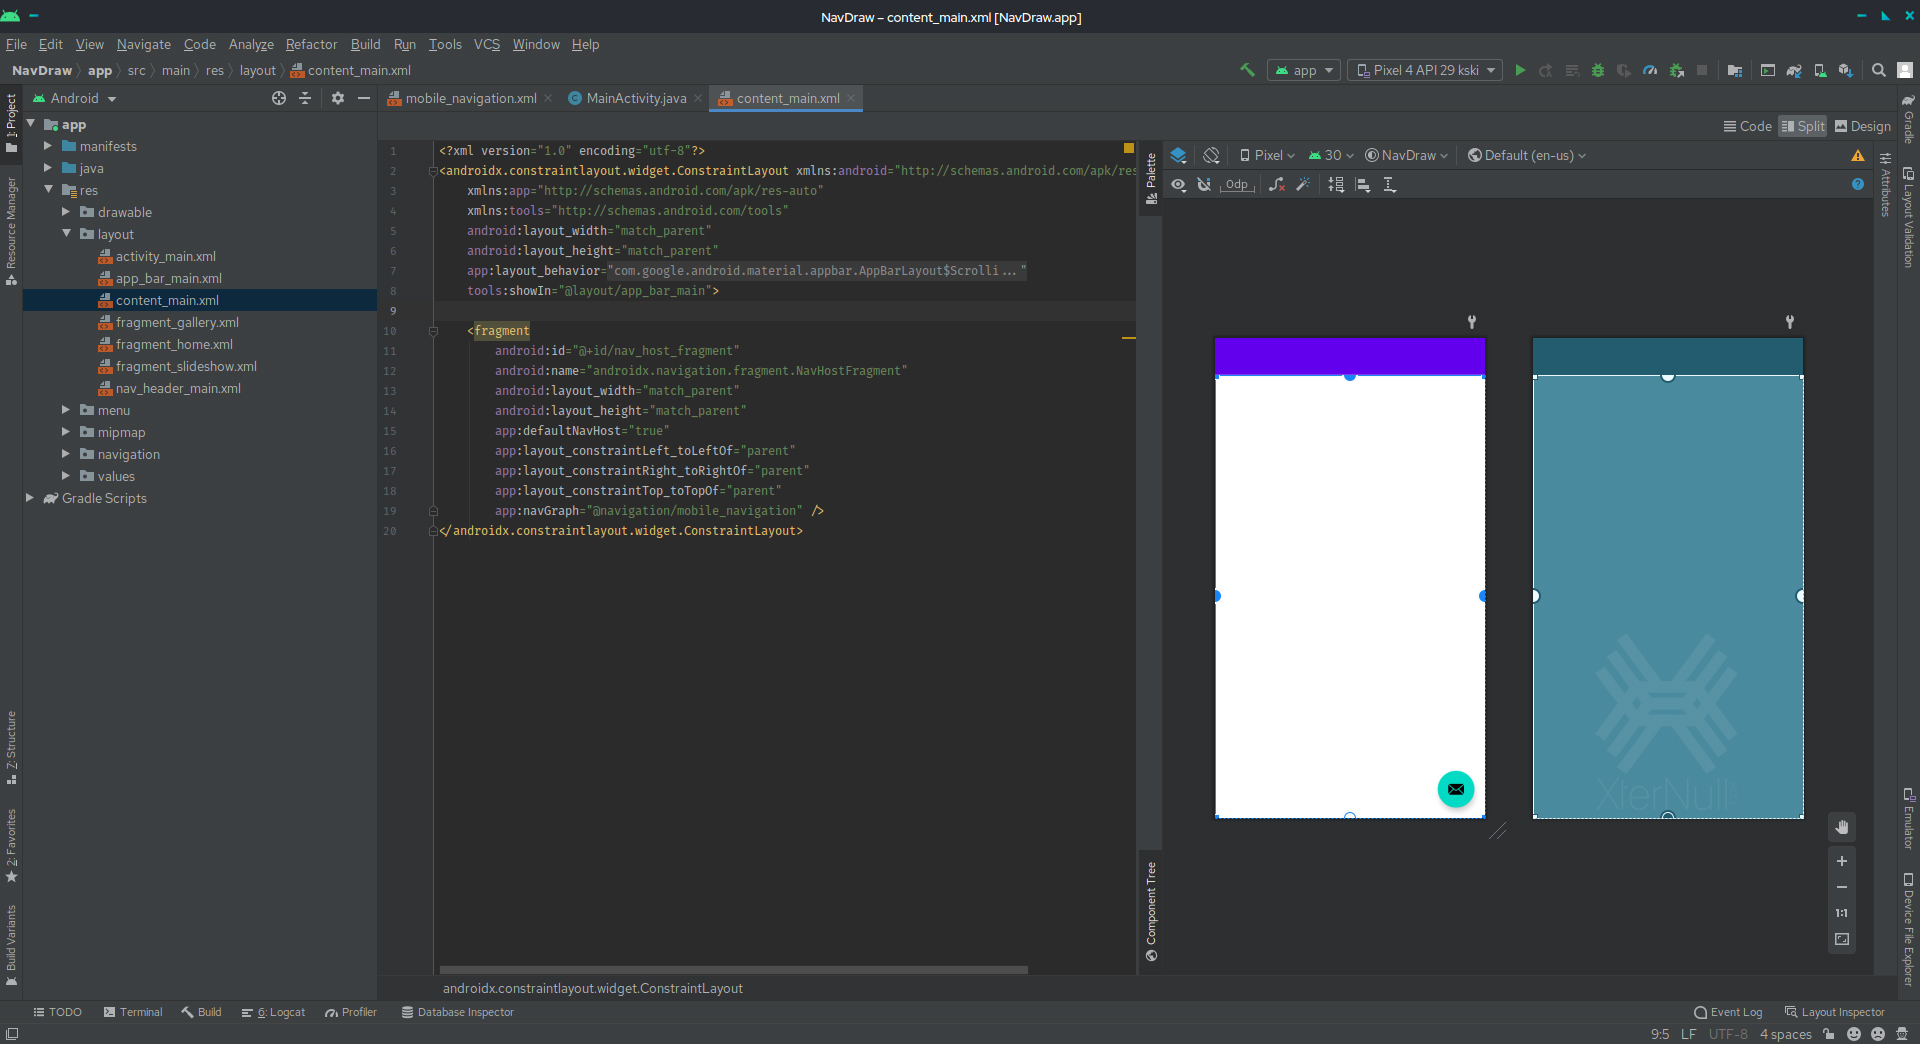 Android Studio Windows/MacOS + Linux - XterNull